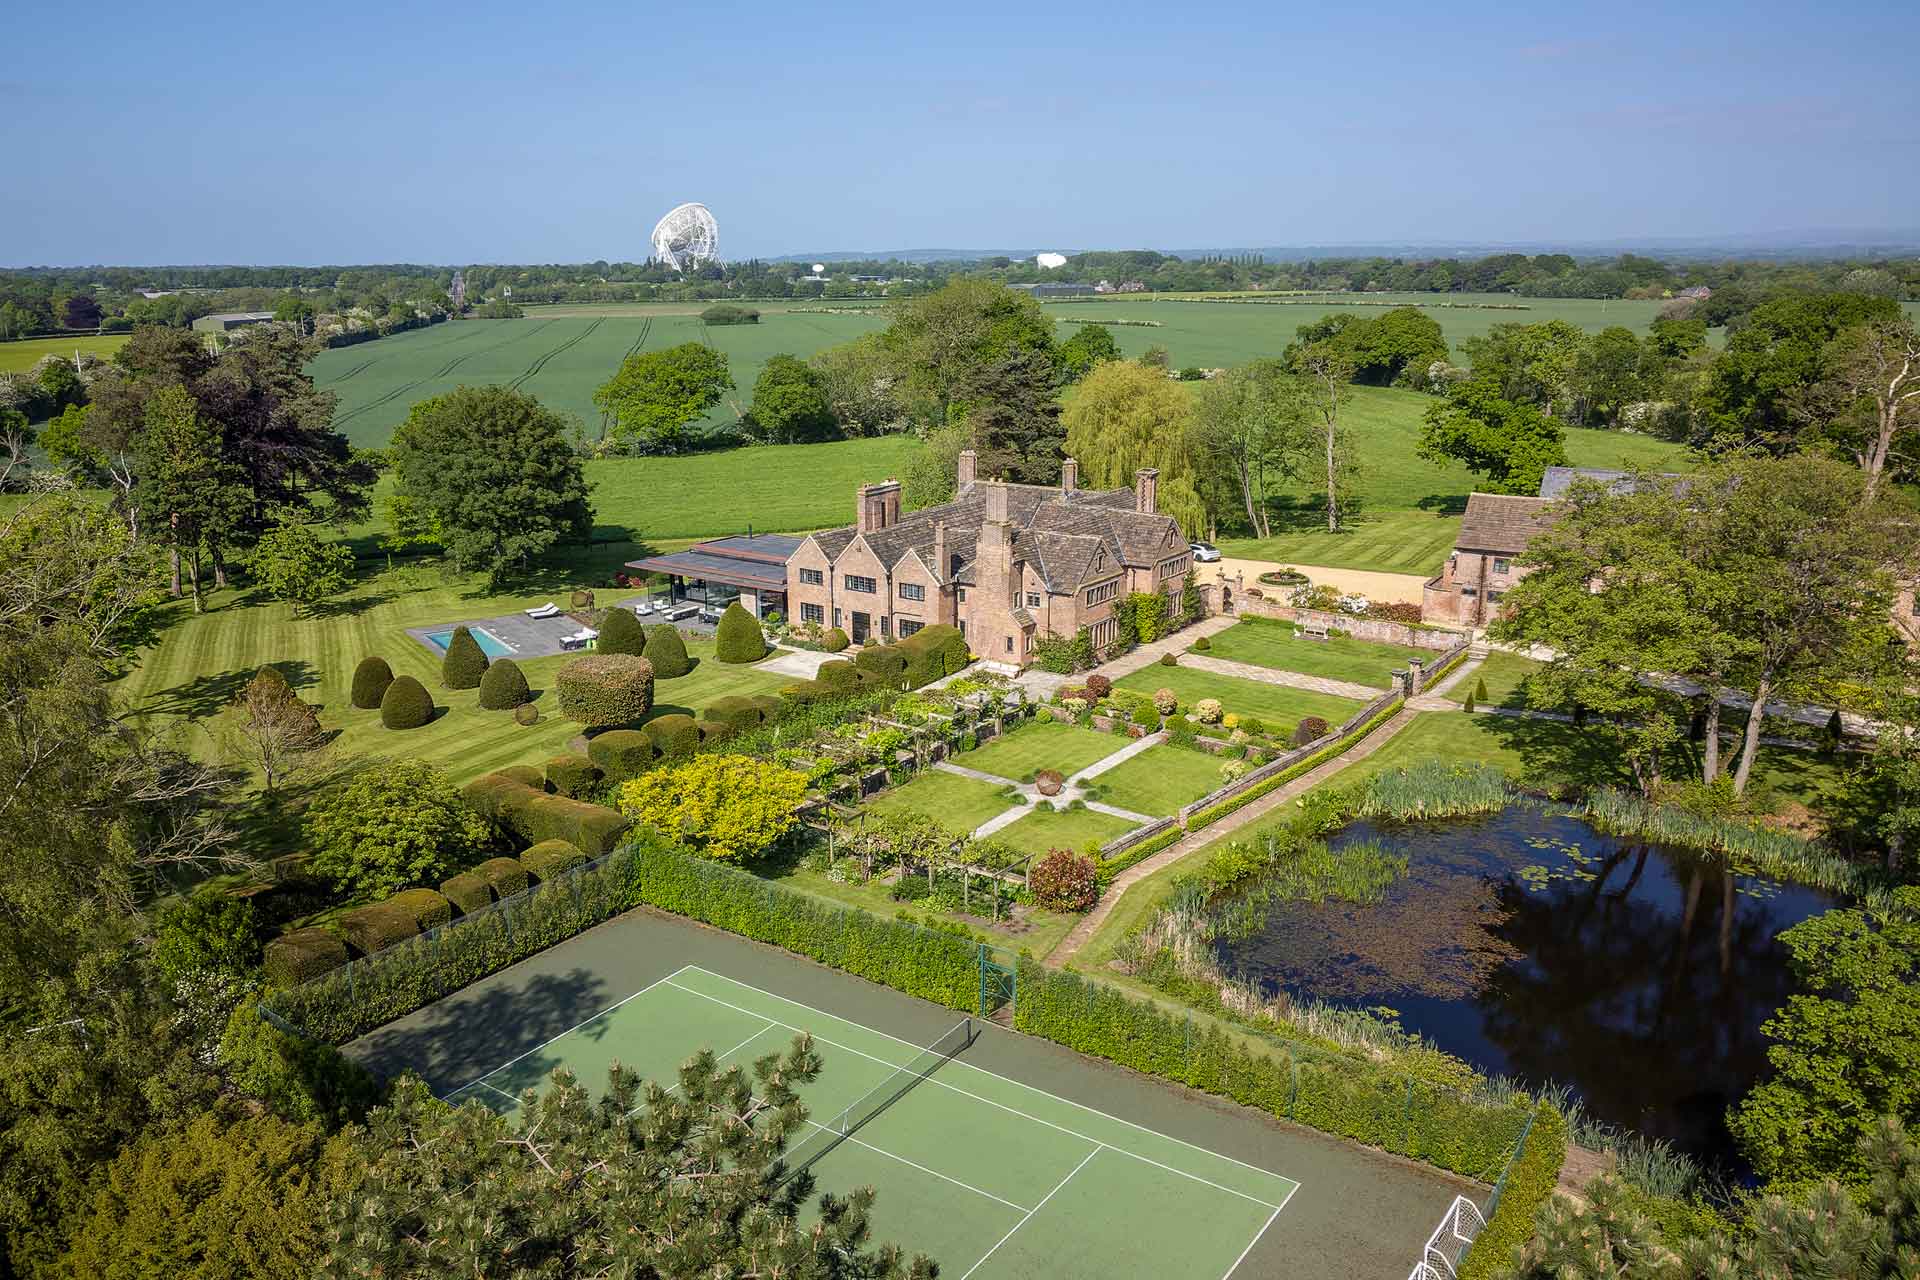 Aerial view of country manor with tennis court and box hedges